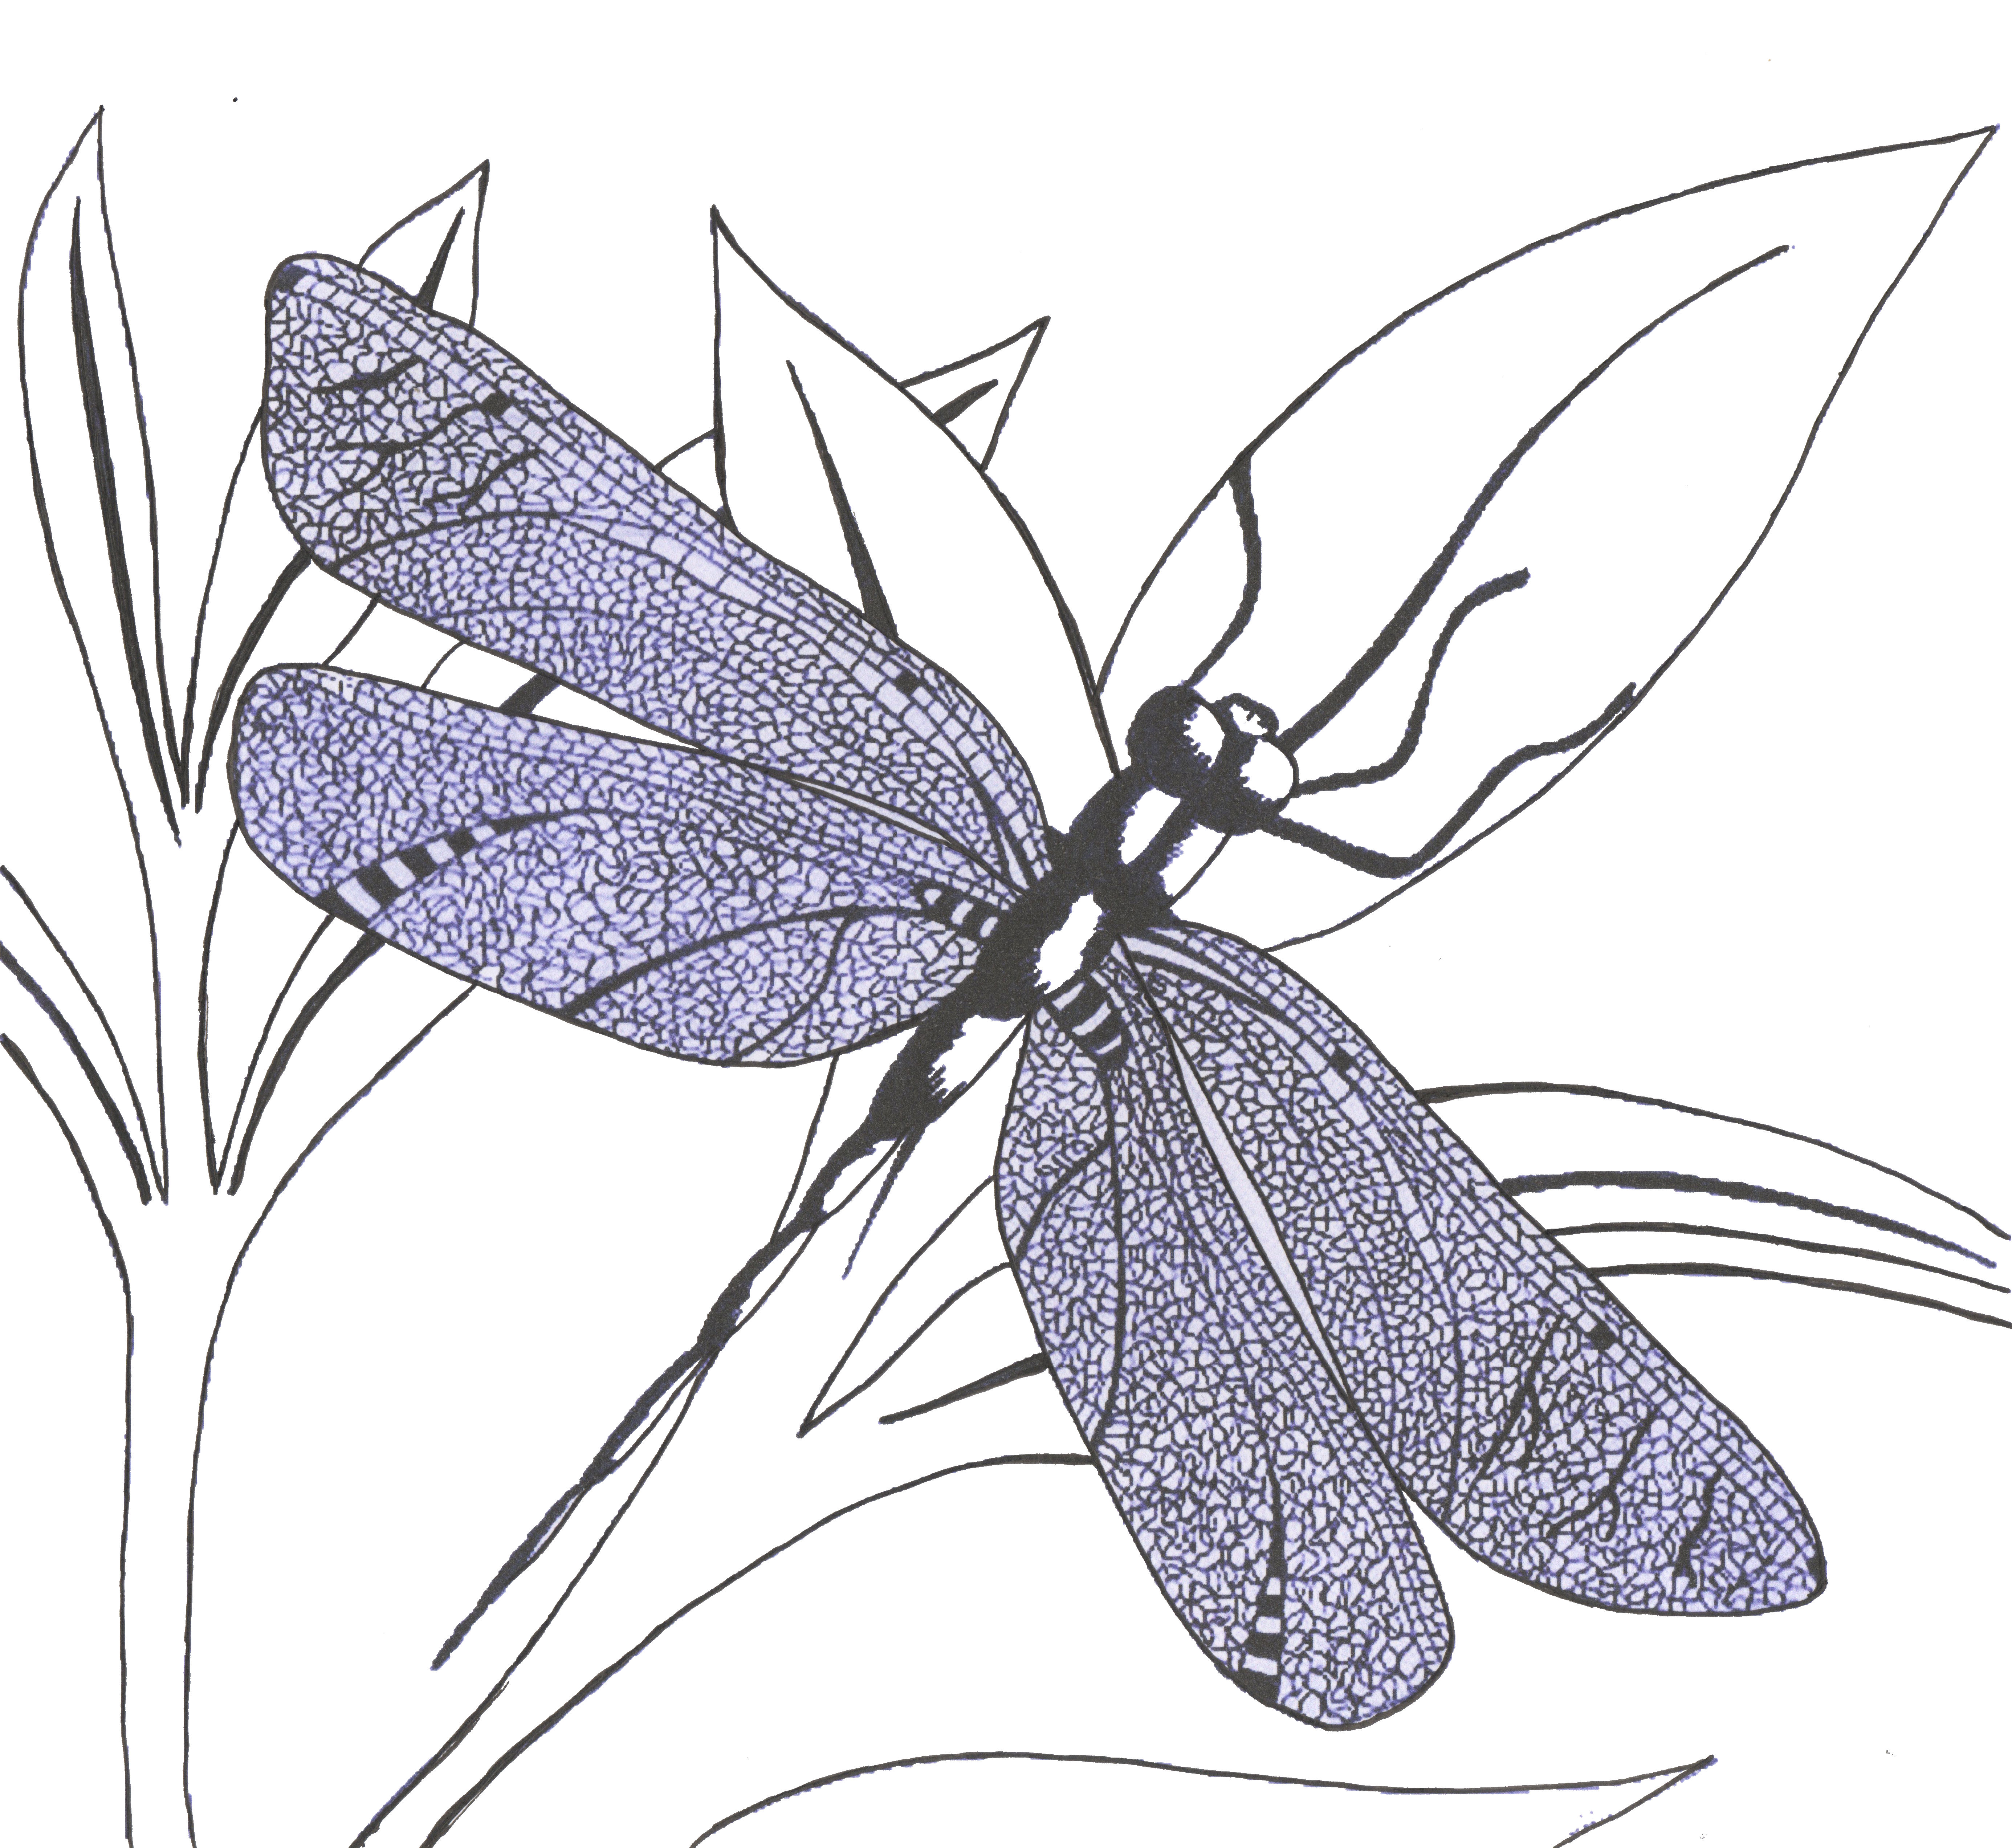 Images For > Dragonfly Drawings In Pencil